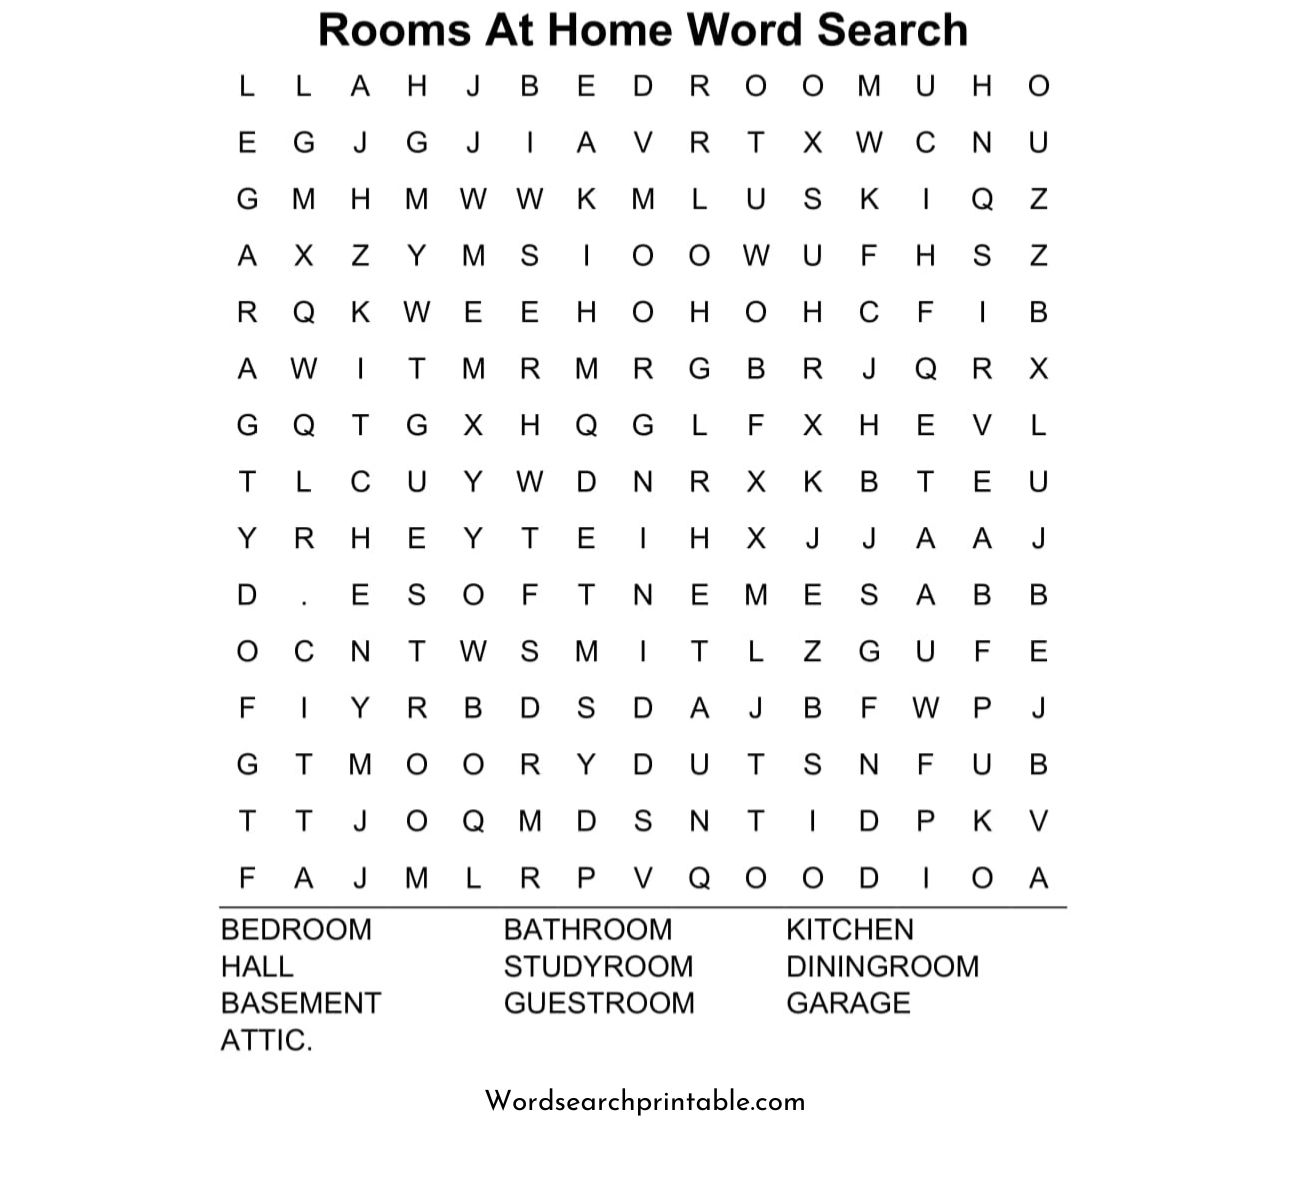 rooma at home word search puzzle